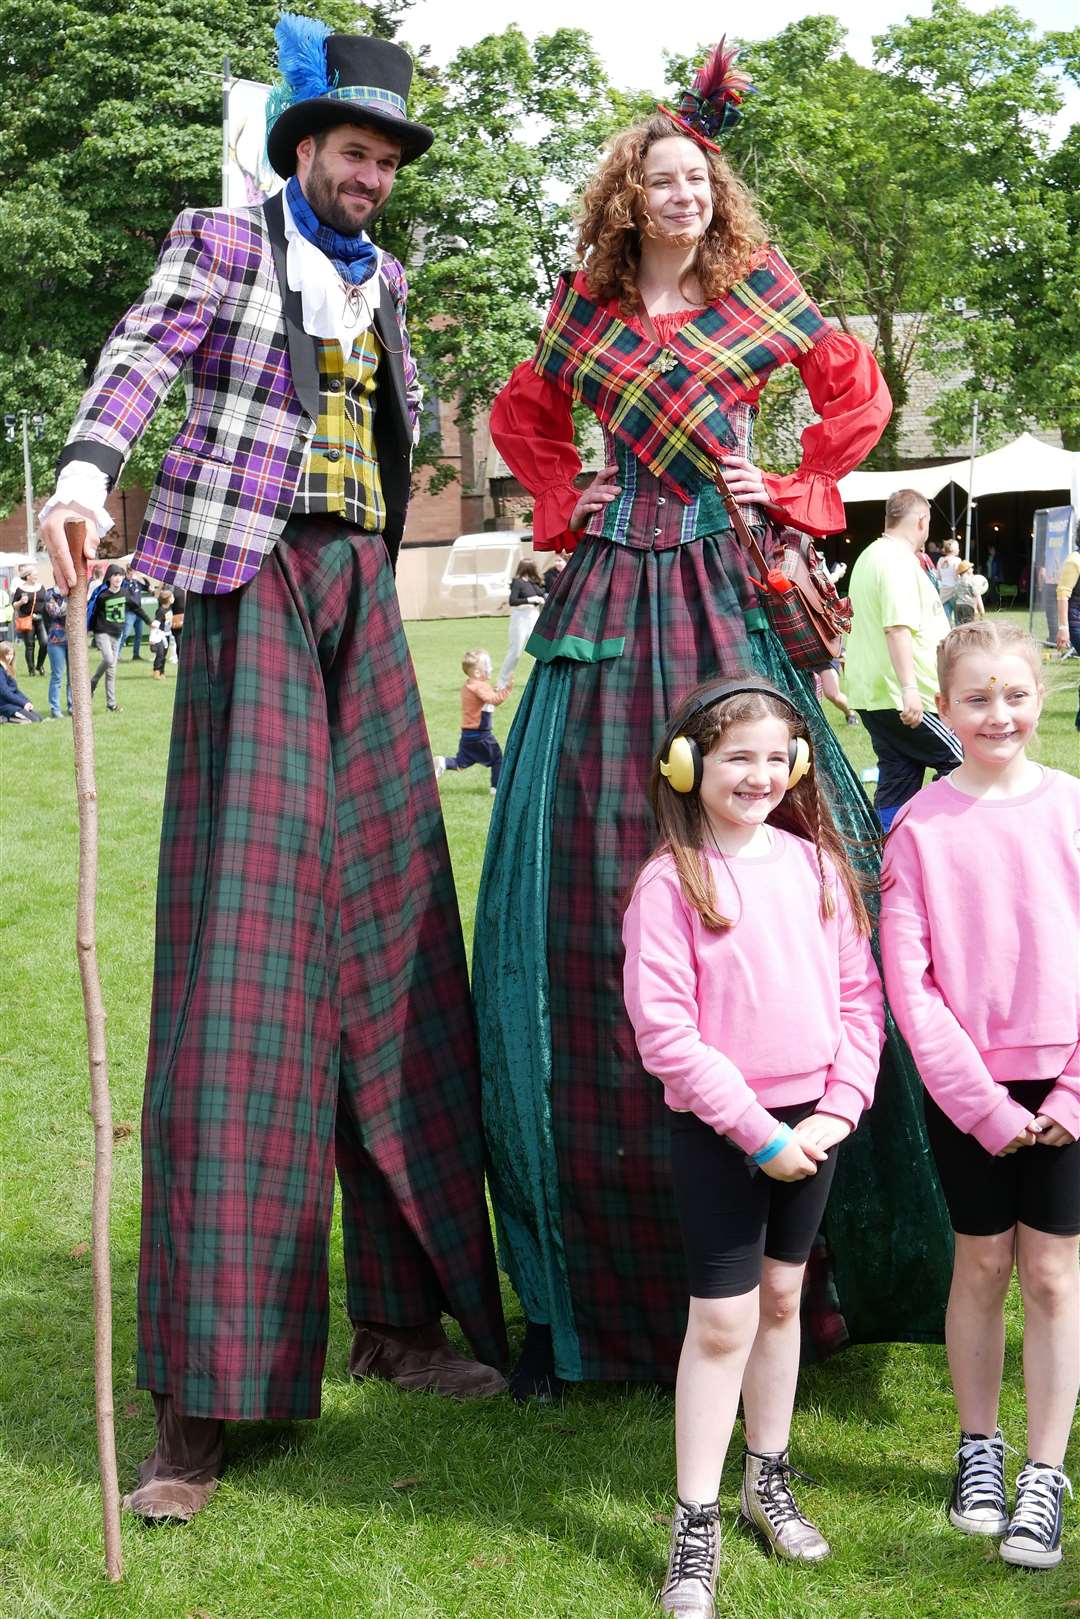 Stilt walkers Daniel Fitzsimmons and Emma Robbie from Fly Agaric with seven-year-old Jessica McCaffrey and nine-year-old Anna Dodds from Fort William.